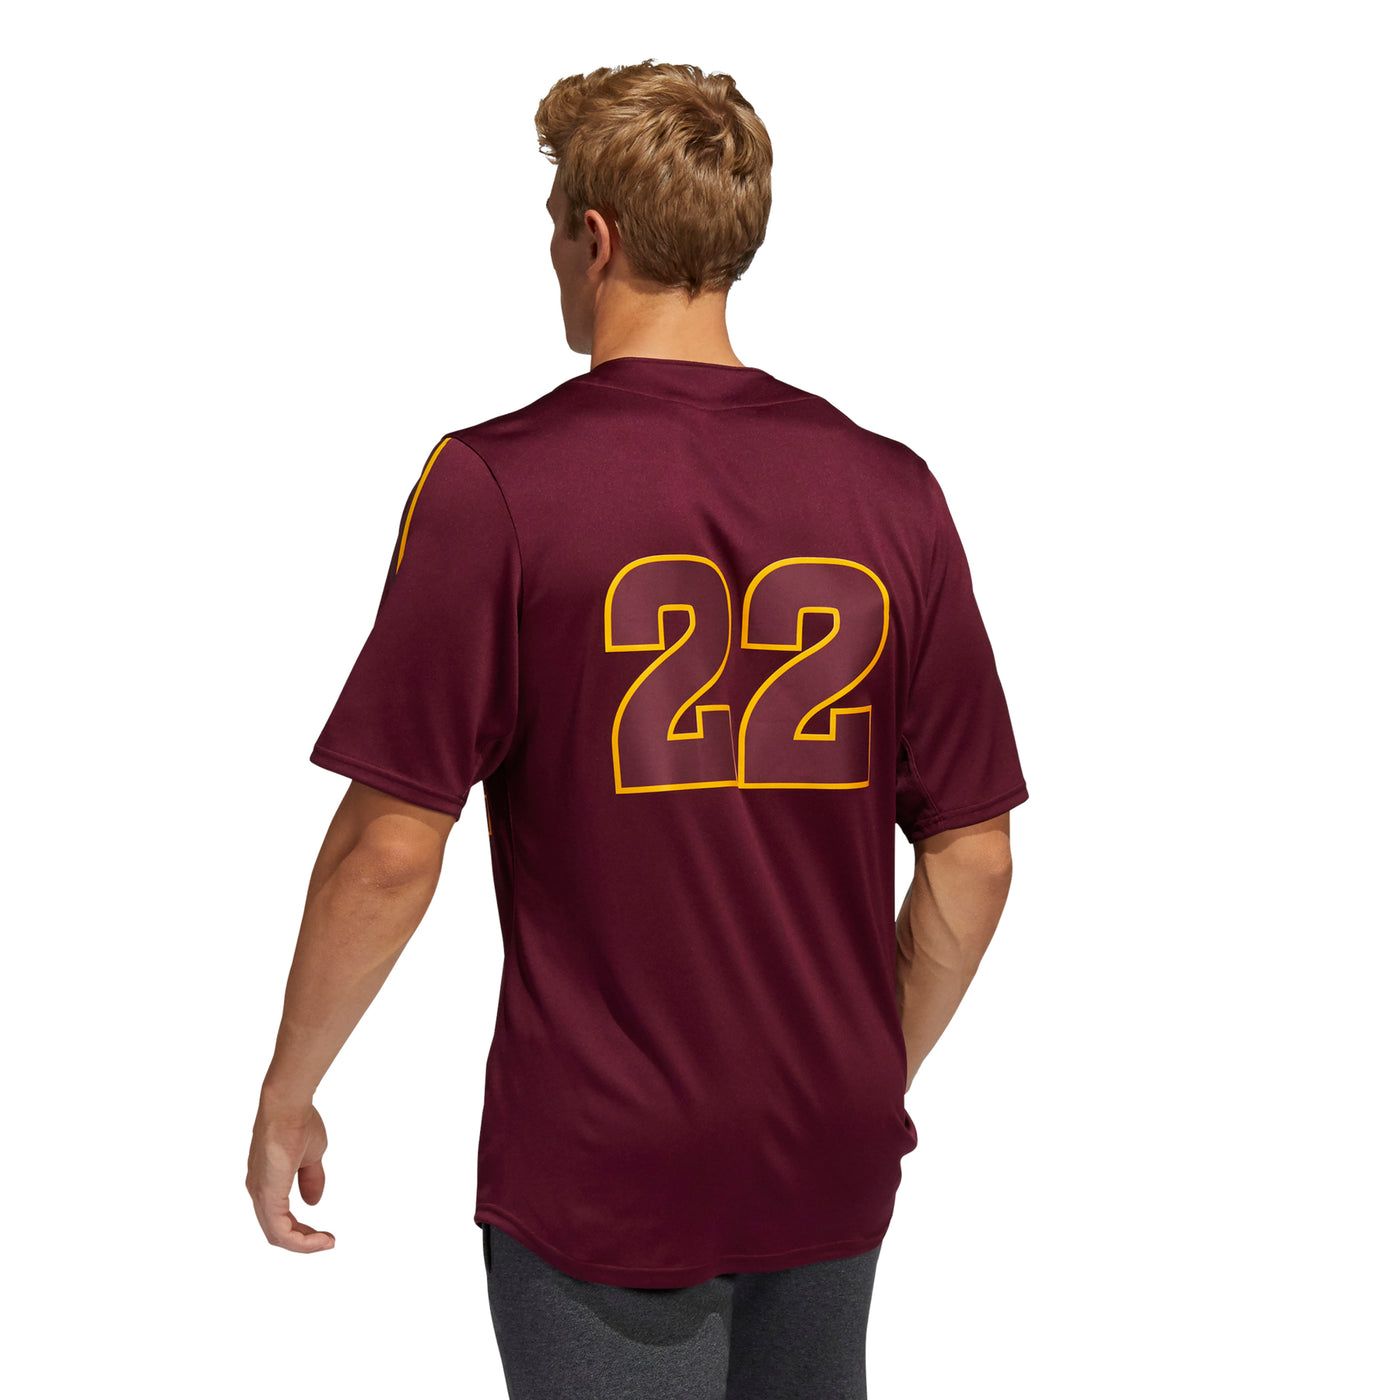 Back view of man wearing an ASU maroon baseball jersey with '22' on the back